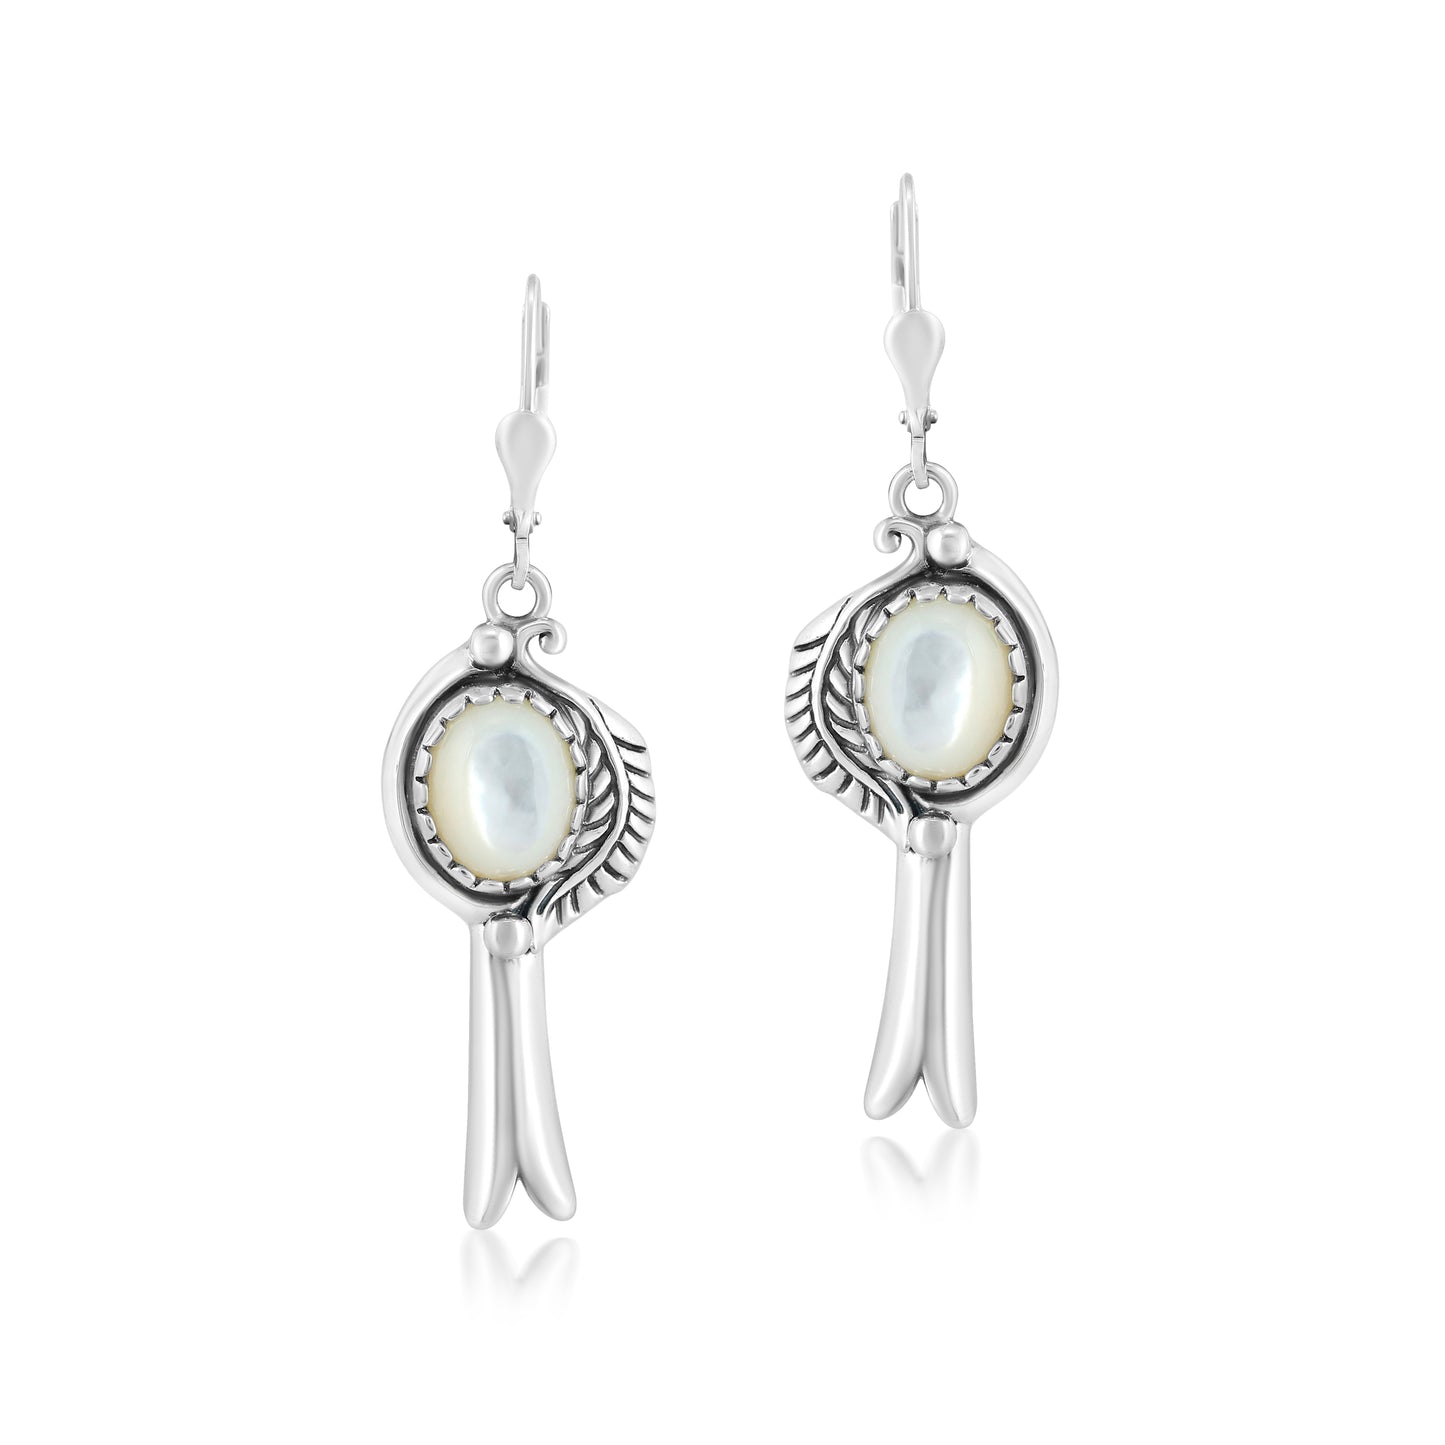 Sterling Silver with White Mother of Pearl Gemstone Leaf and Squash Blossom Design Women's Drop and Dangle Earrings